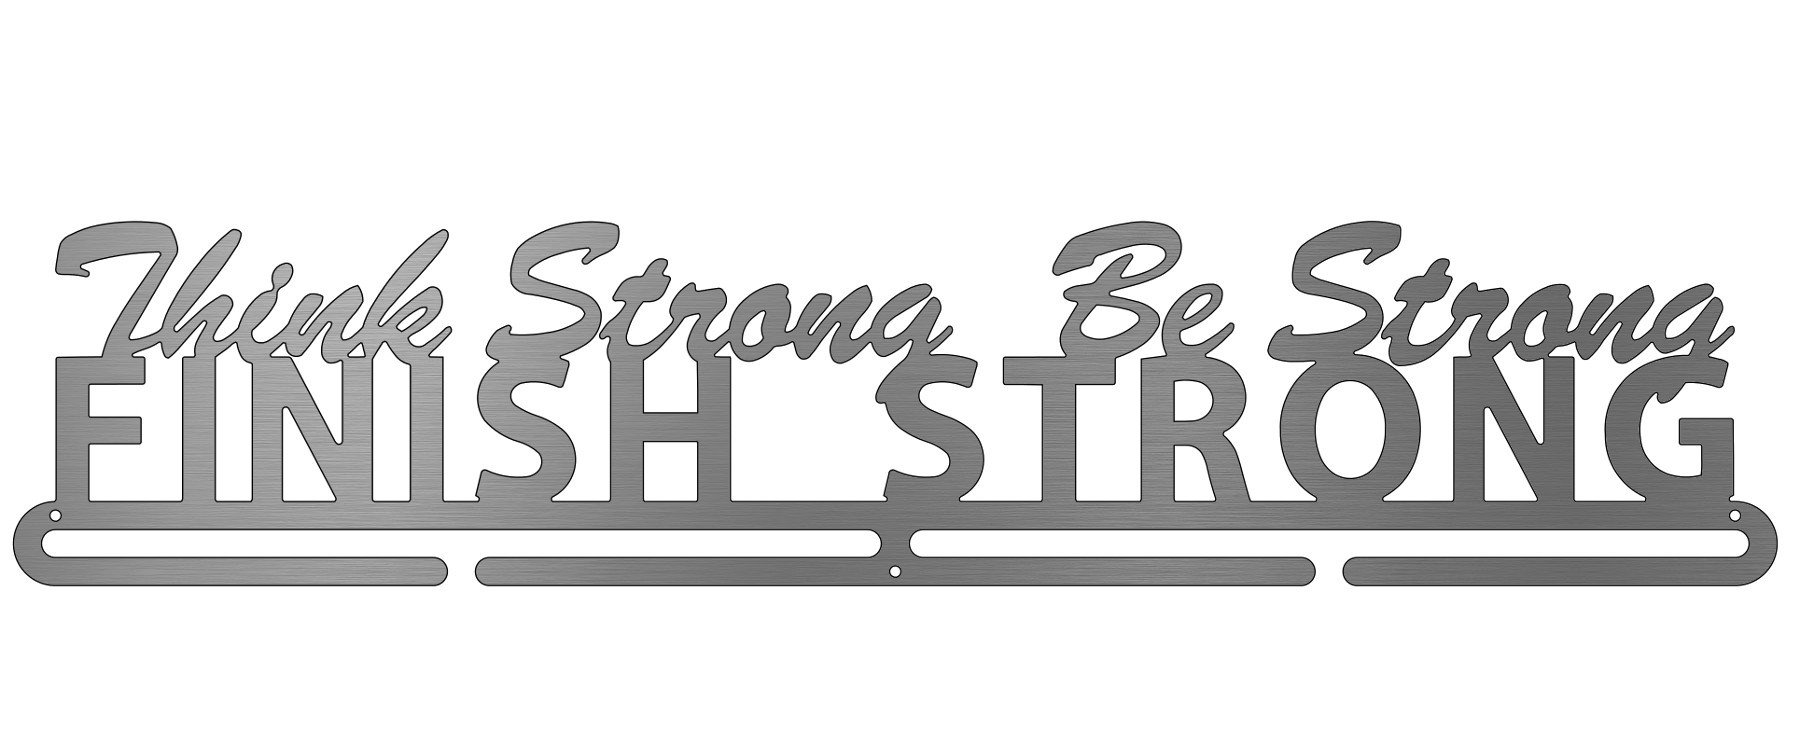 Think Strong, Be Strong, Finish Strong